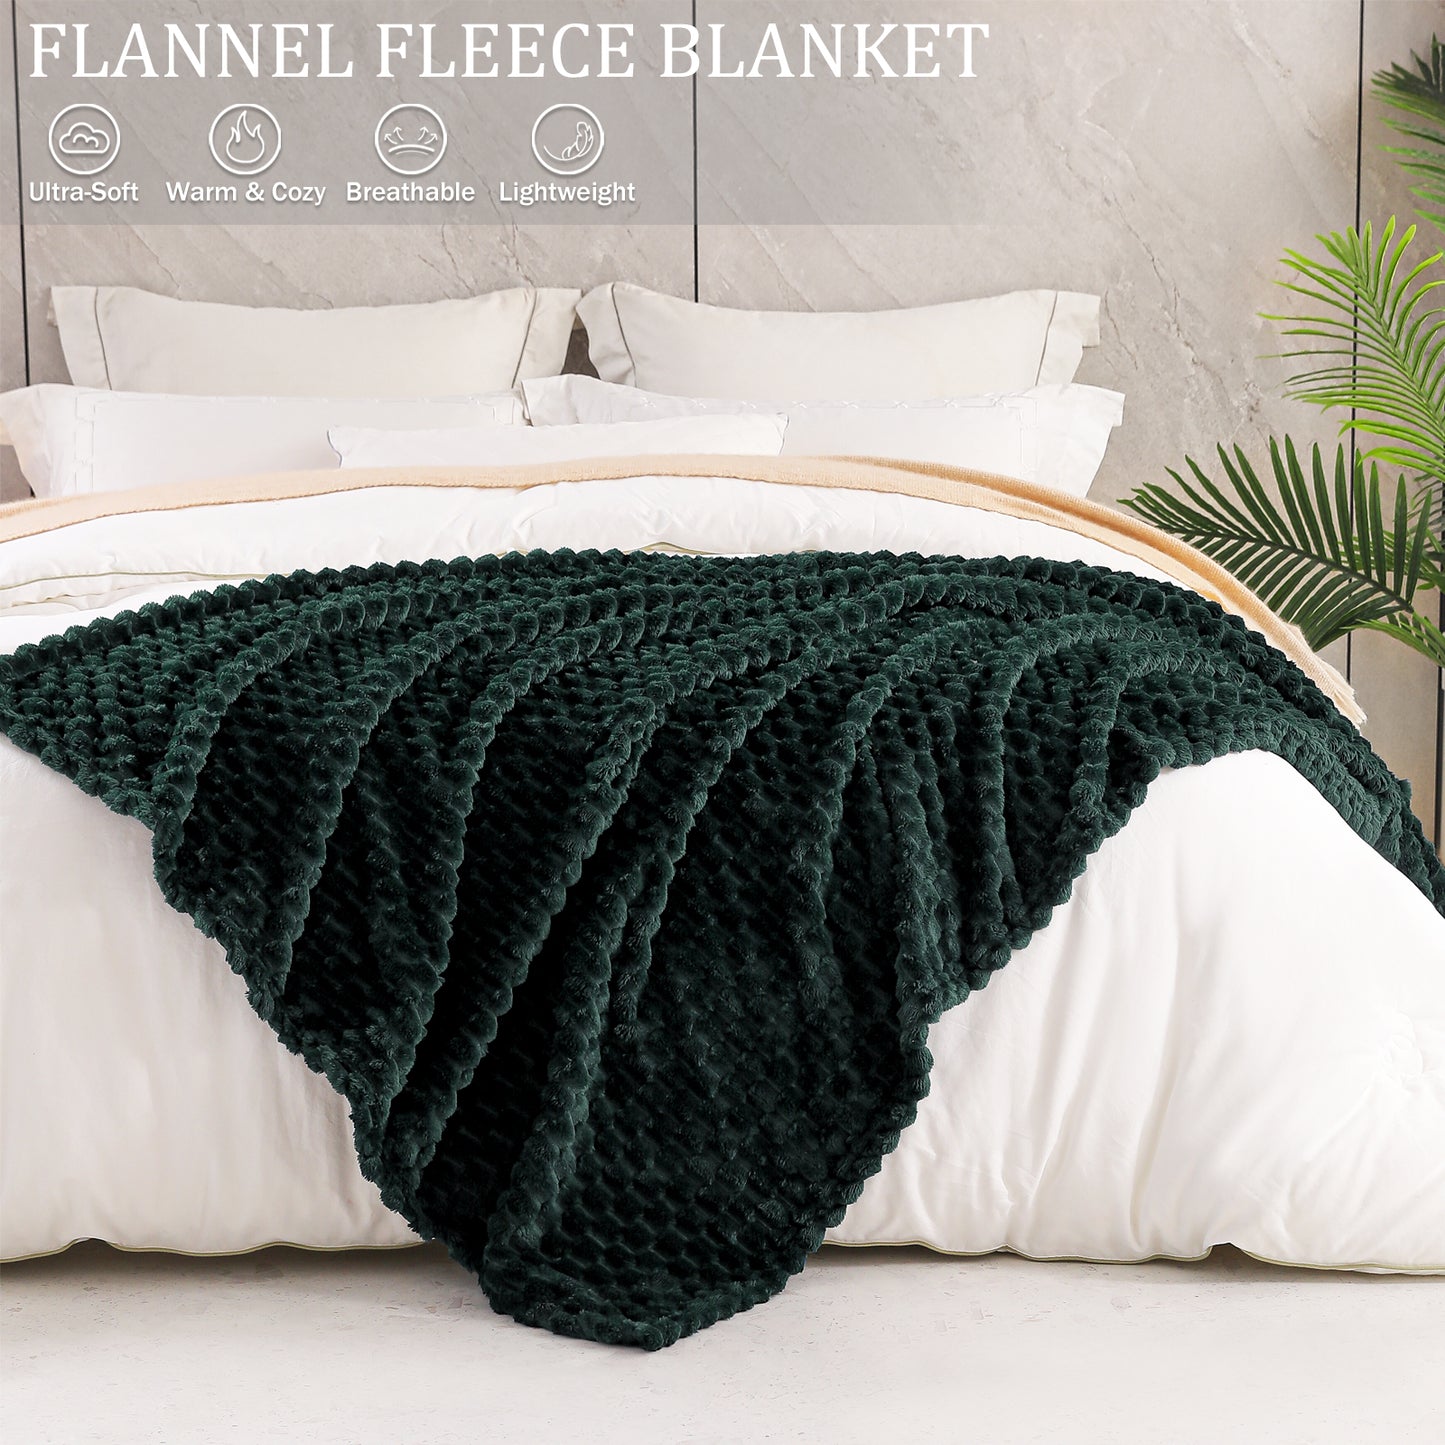 Exclusivo Mezcla King Size Flannel Fleece Blanket, 90x104 Inches Stylish Jacquard Velvet Plush Blanket for Bed, Cozy, Warm, Lightweight and Decorative Forest Green Blanket